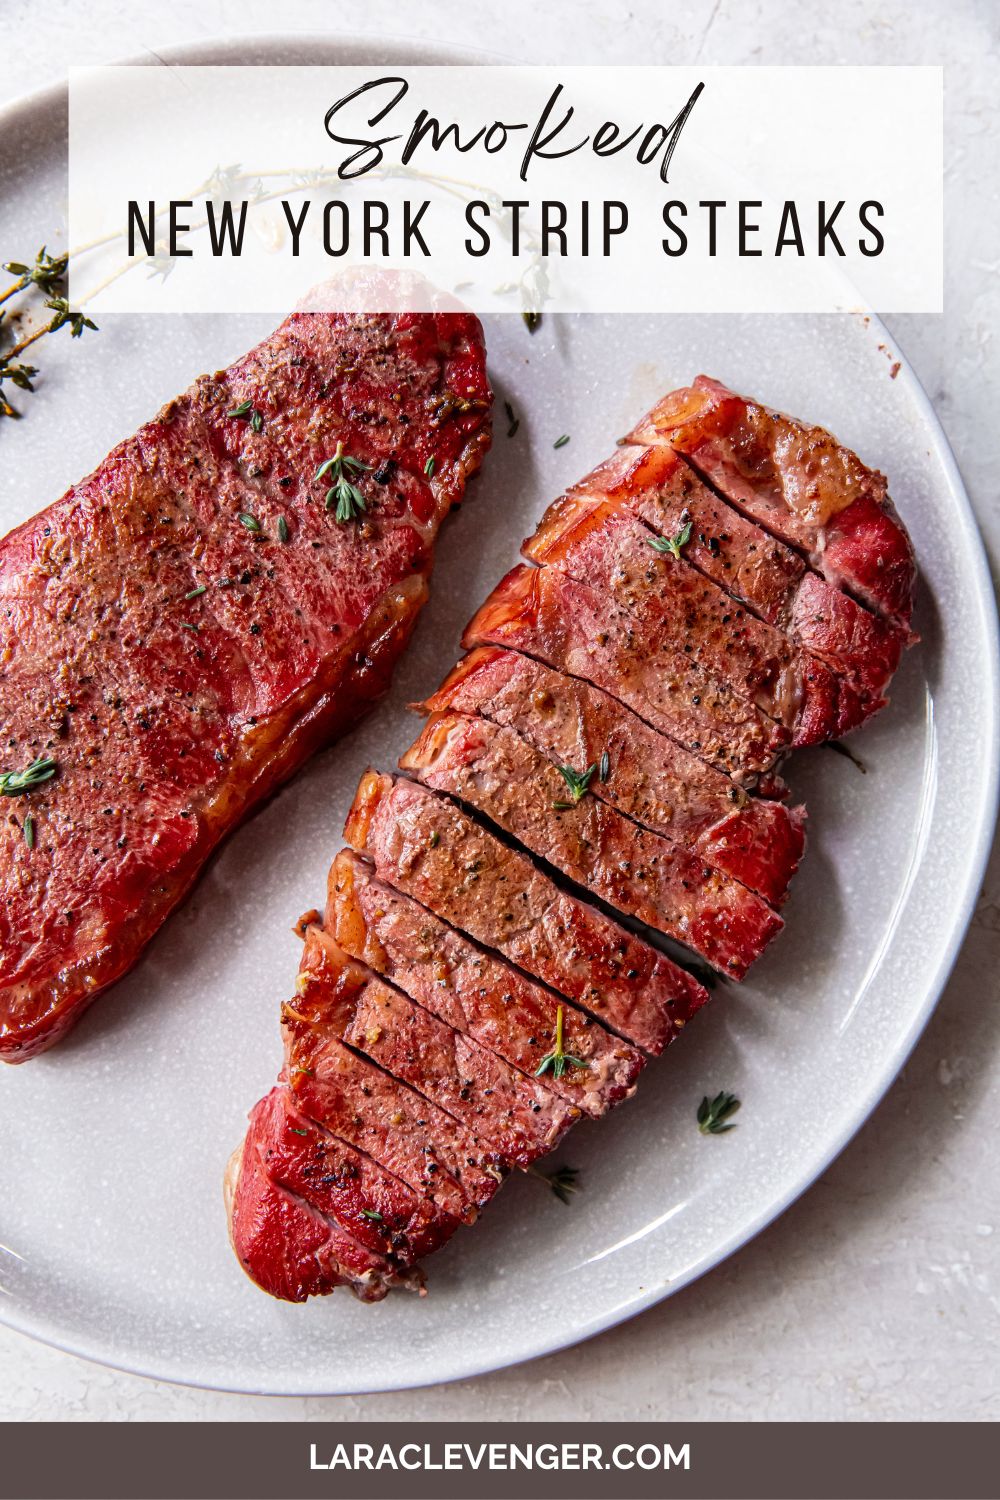 pin of Smoked New York Strip Steaks on a white plate with herbs